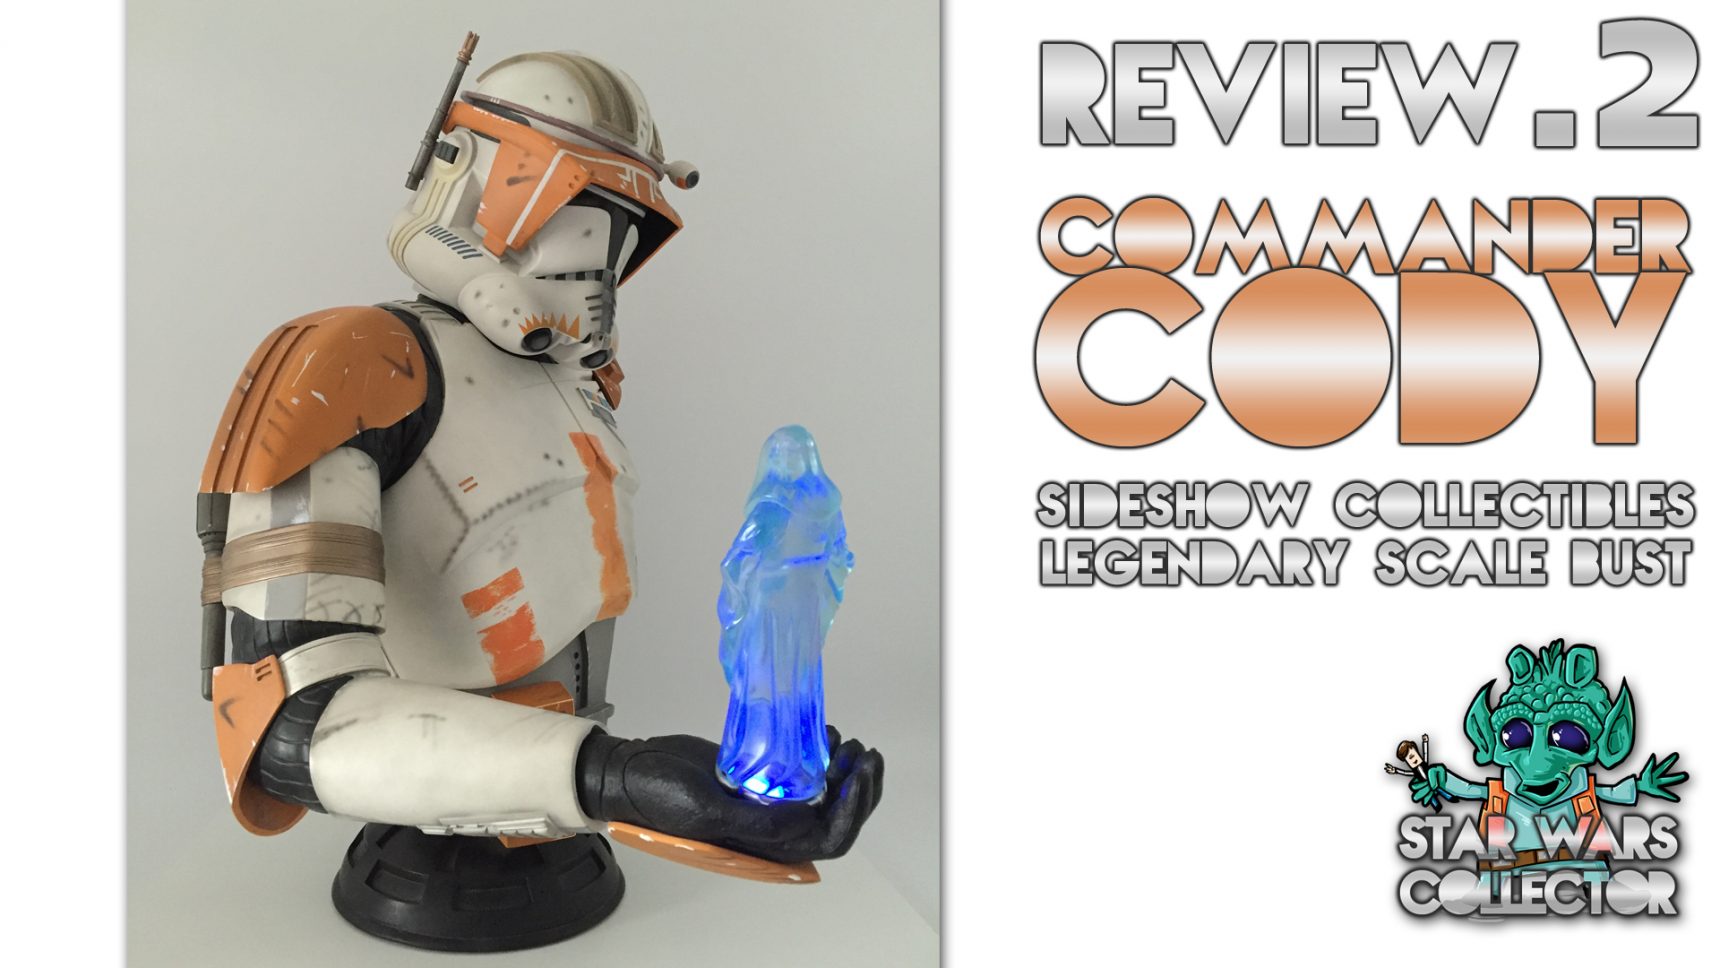 #review: Sideshow Commander Cody Legendary Scale Bust – Video